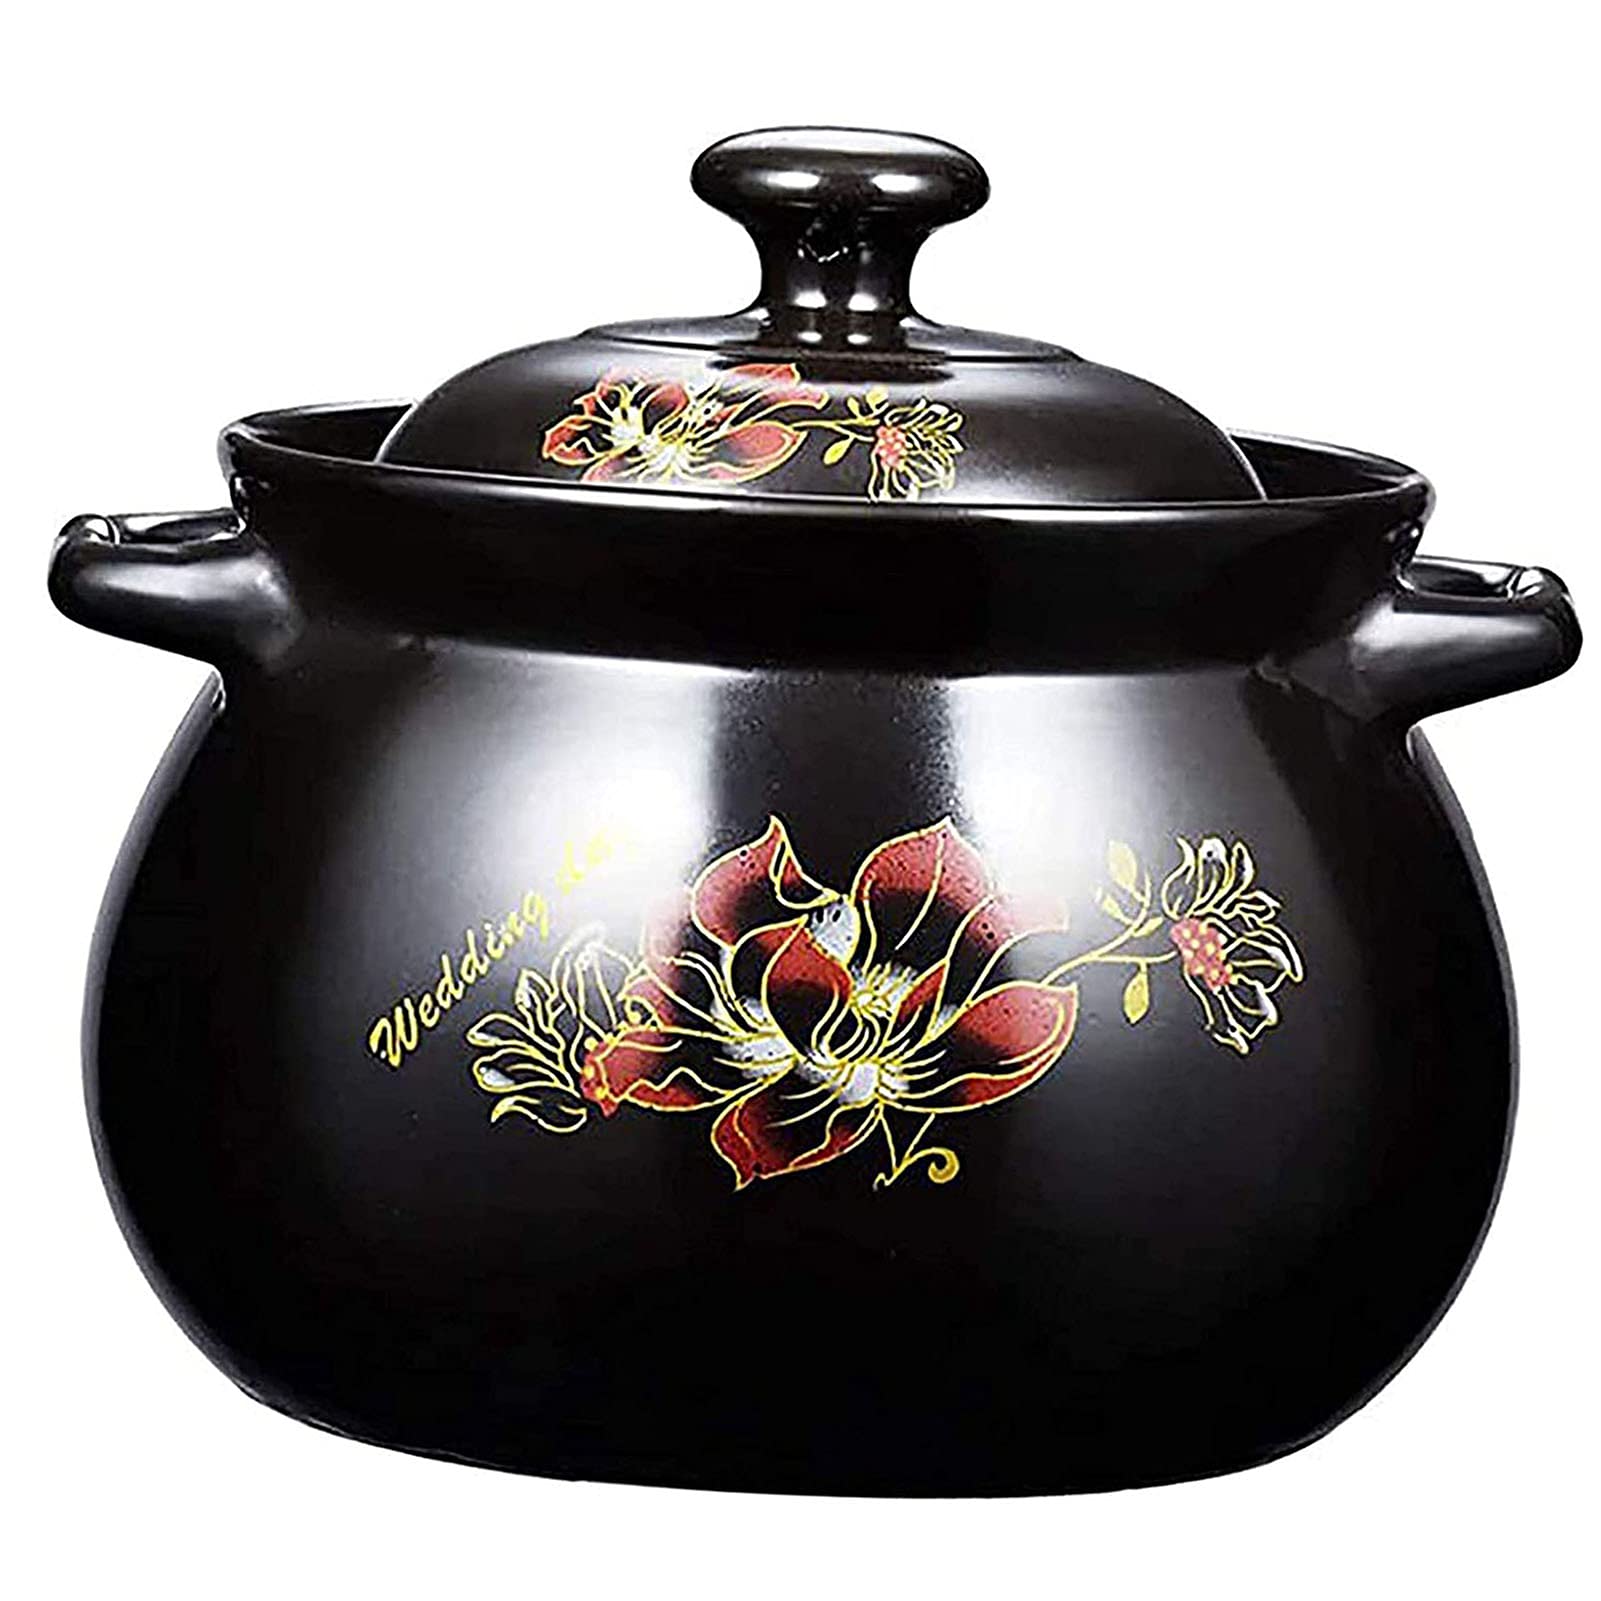 Hengqiyuan Casserole Dish with Lid,Ceramic Casserole Pot Non Stick Stock Pot,Casserole, Clay Pot for Cooking, Oven Safe, Stone Pot Made of Natural Clay, Traditional Crafts,Schwarz,4L